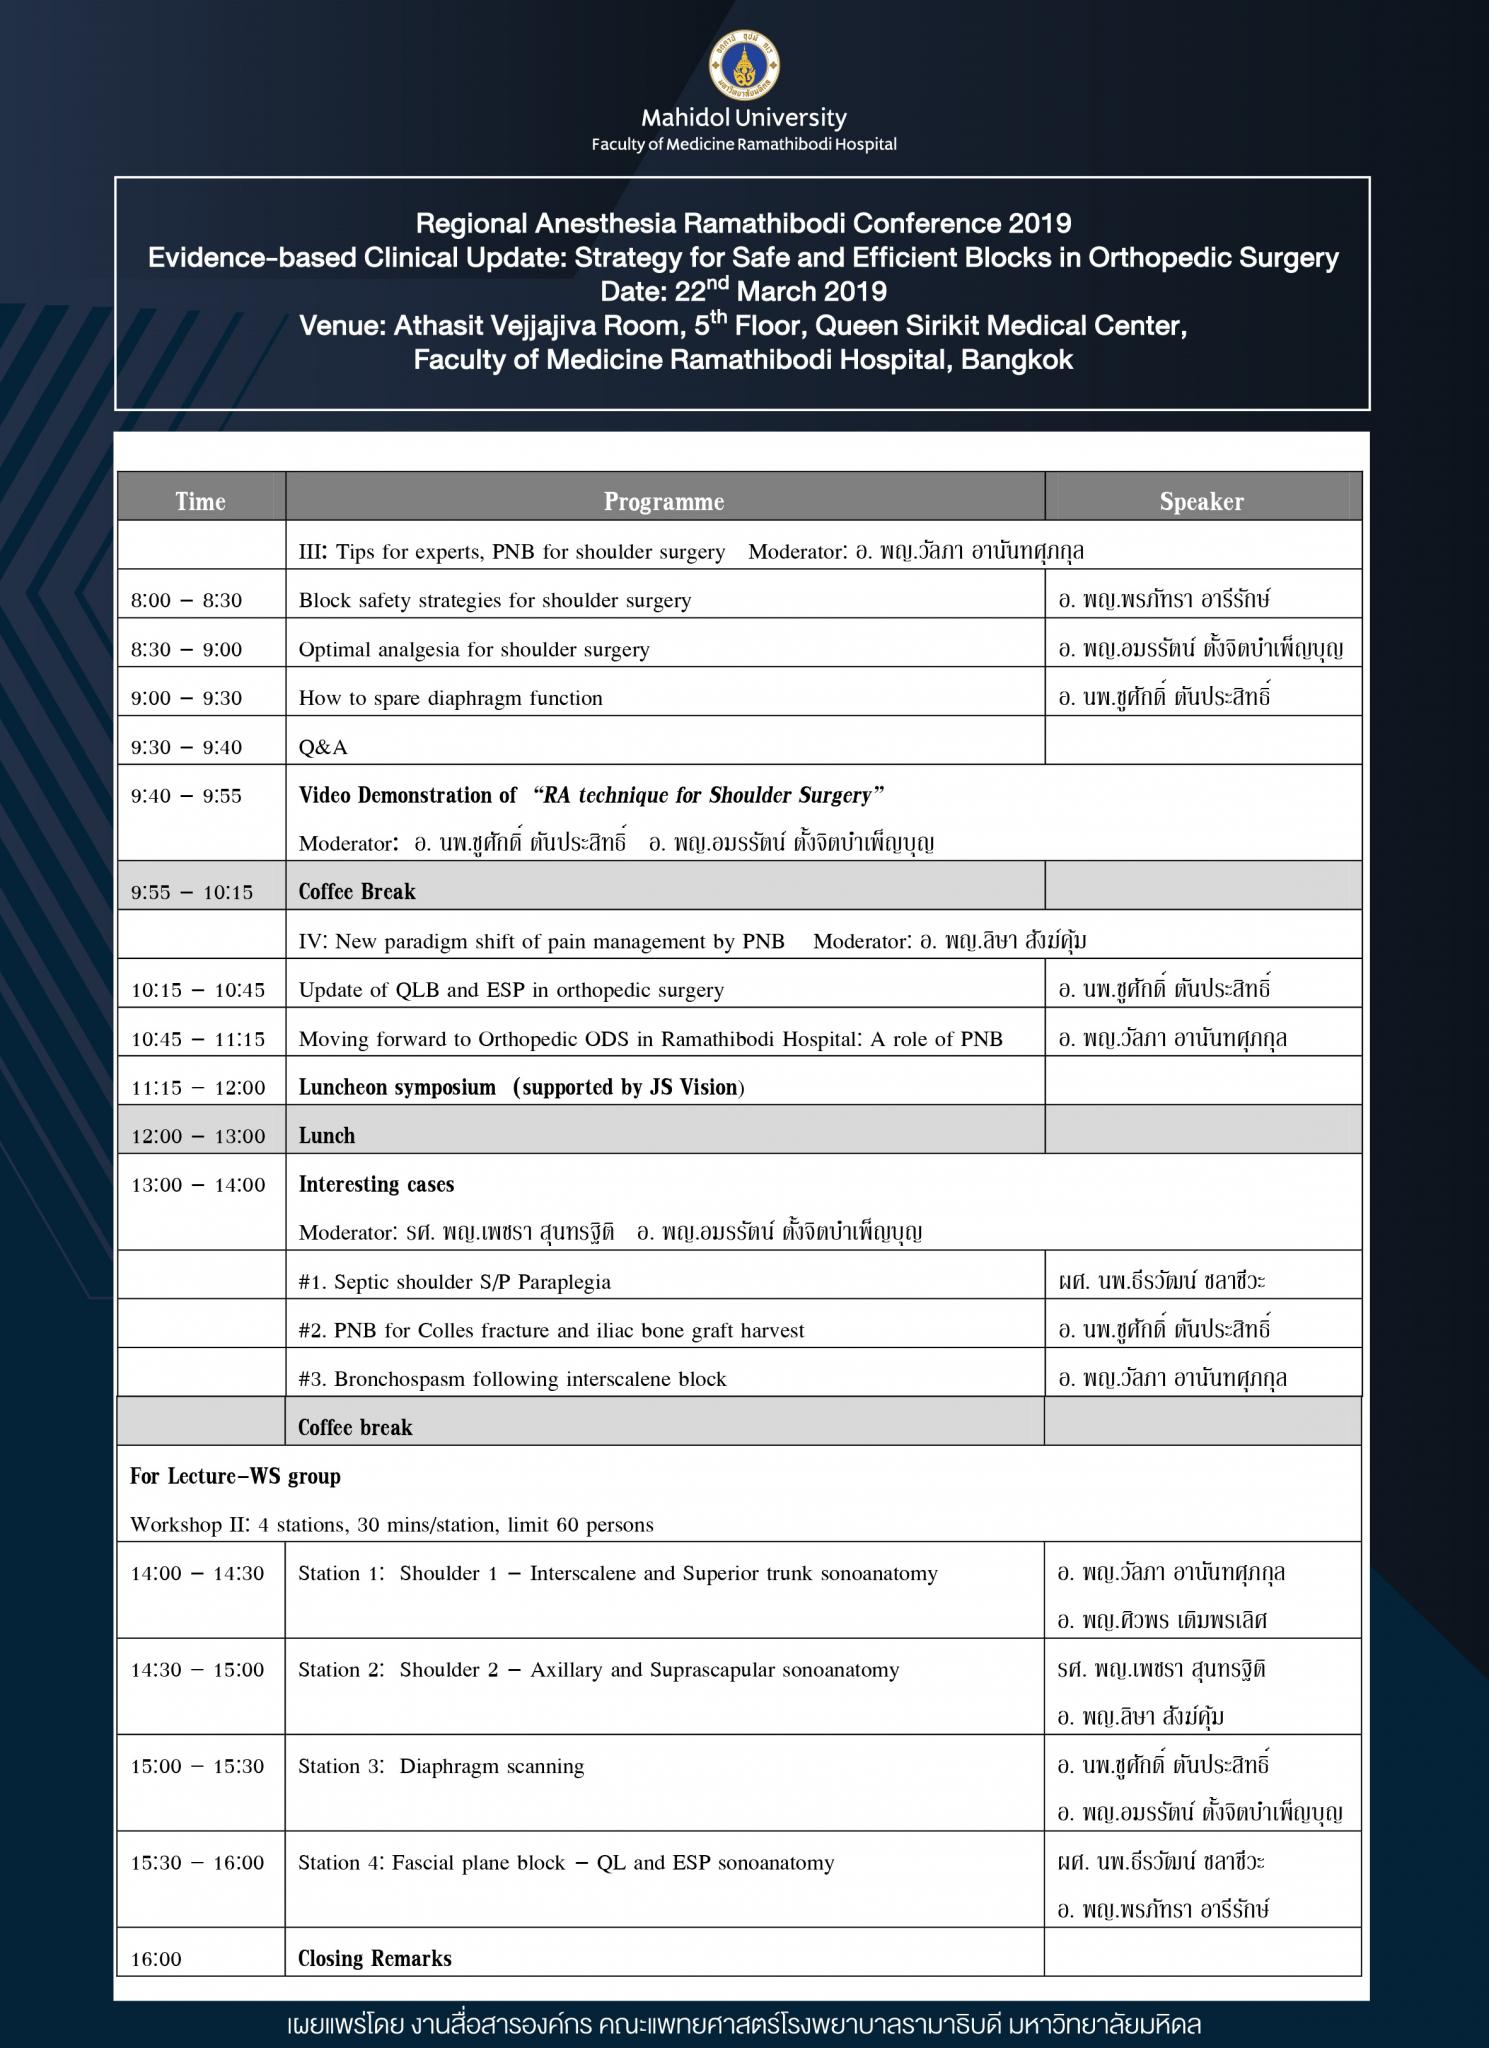 Regional Anesthesia Ramathibodi Conference 2019 Evidence-based Clinical Update Strategy for Safe and Efficient Blocks in Orthopedic Surgery